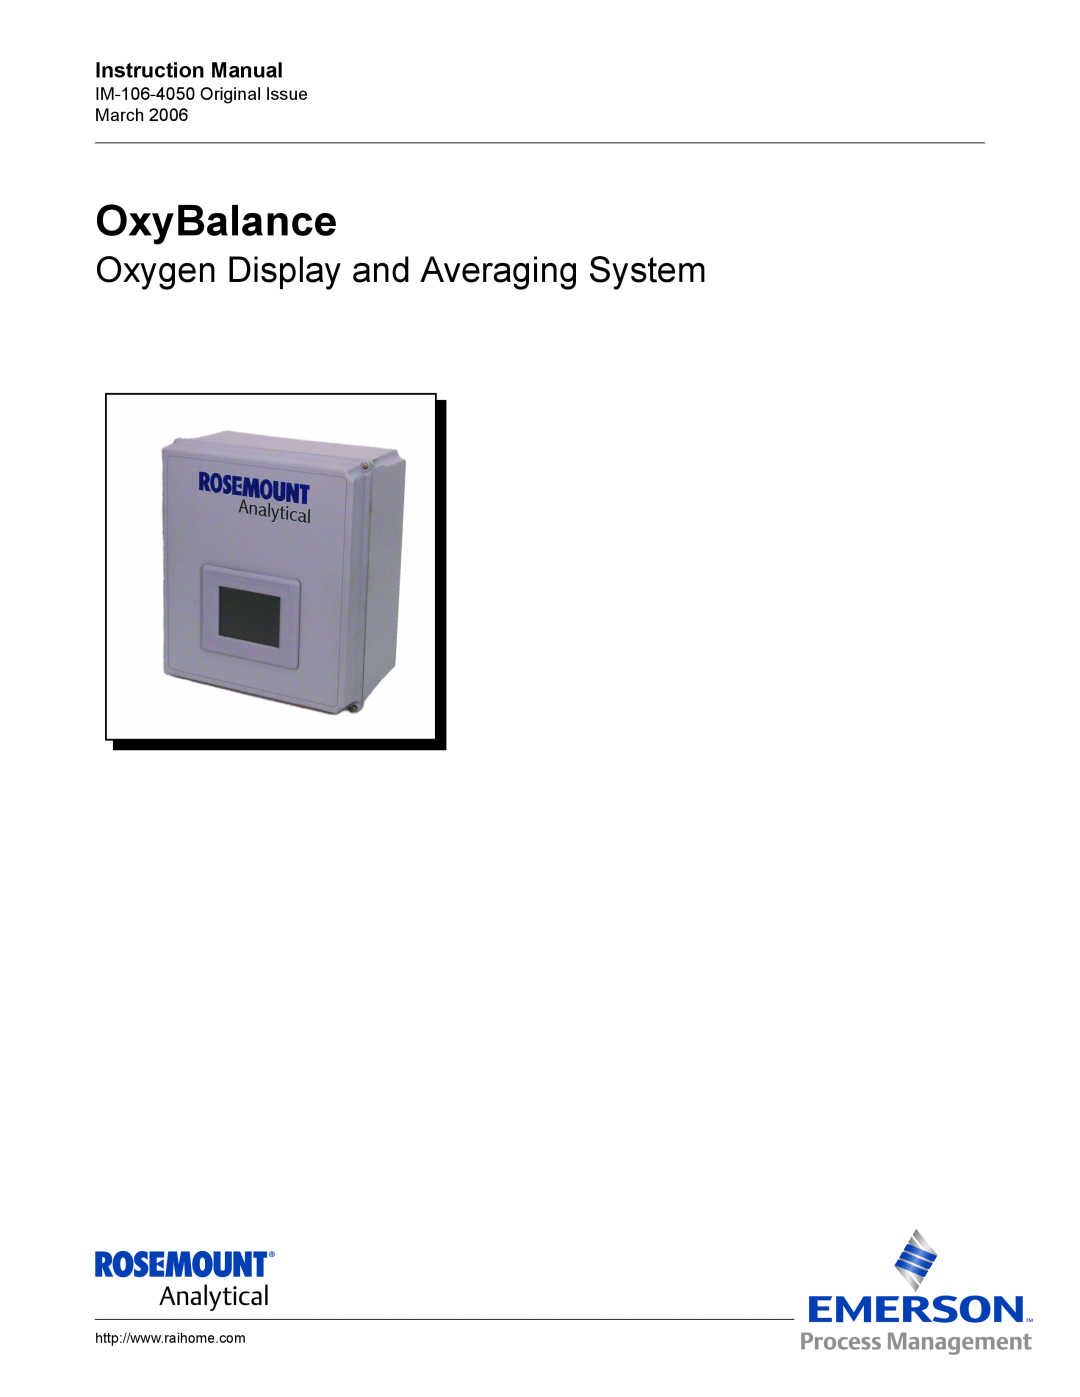 Emerson IM-106-4050 instruction manual Instruction Manual, OxyBalance, Oxygen Display and Averaging System 